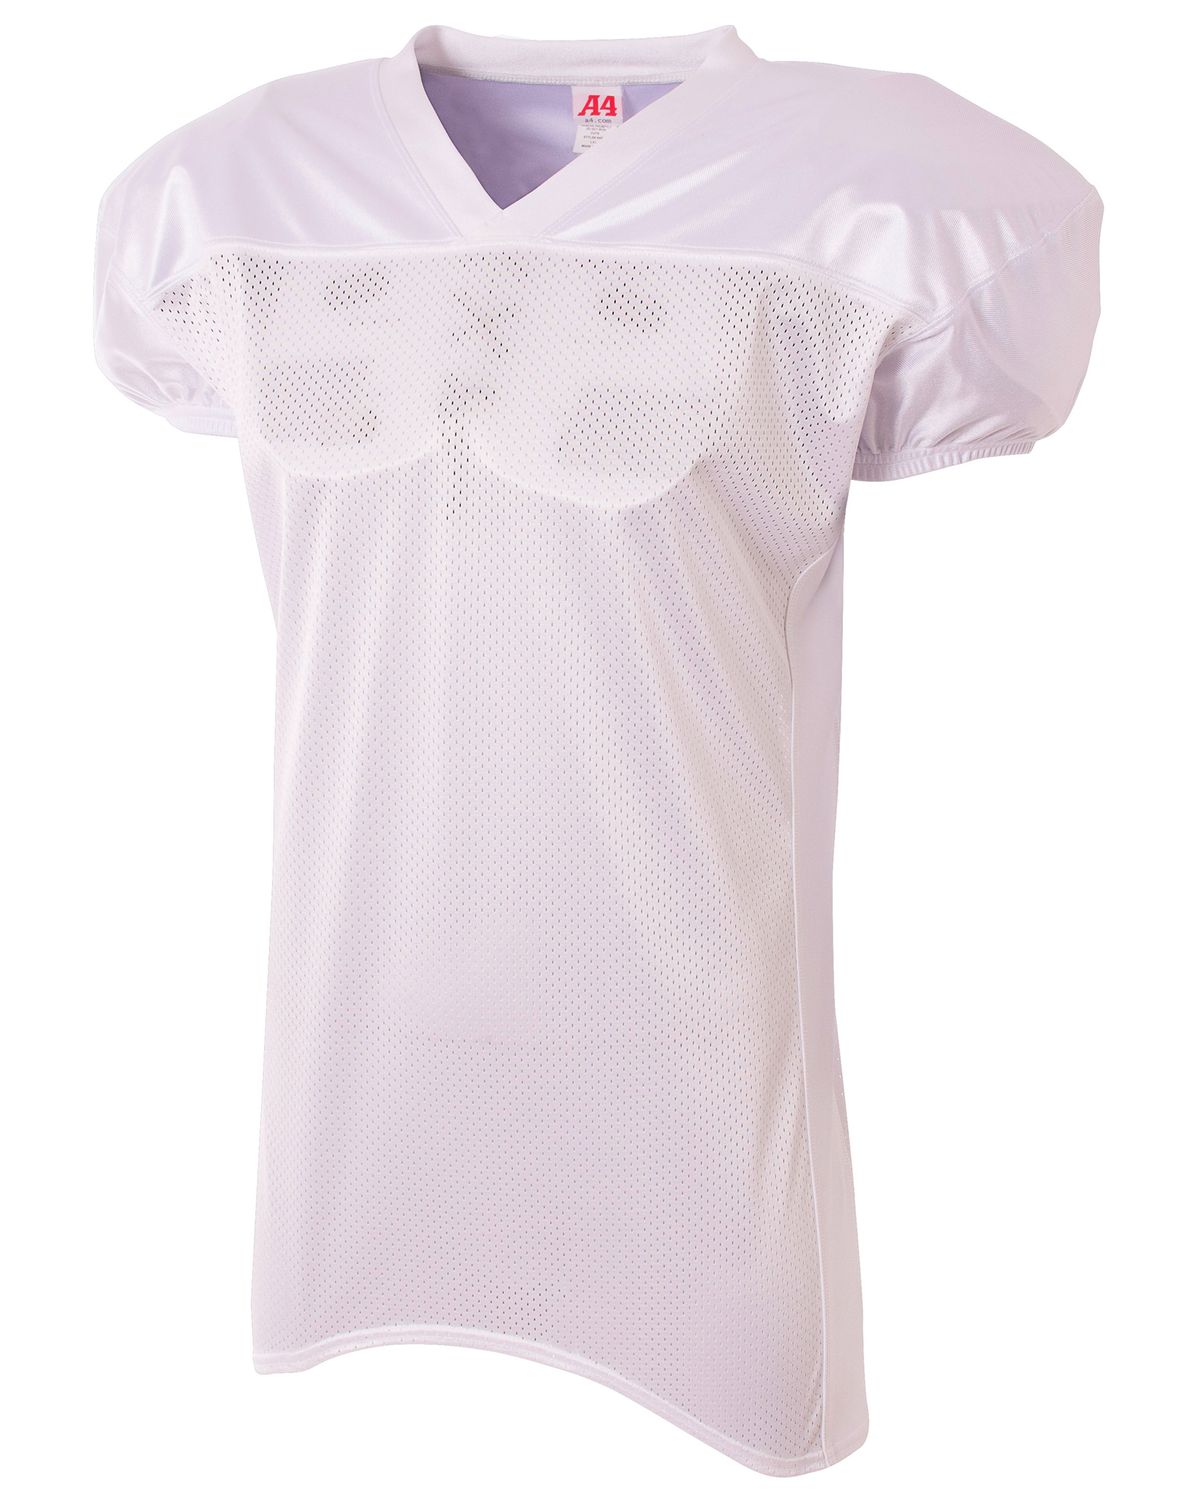 'A4 N4242 Adult Nickleback Tricot Body w/ Double Dazzle Cowl And Skill Sleeve Football Jersey'